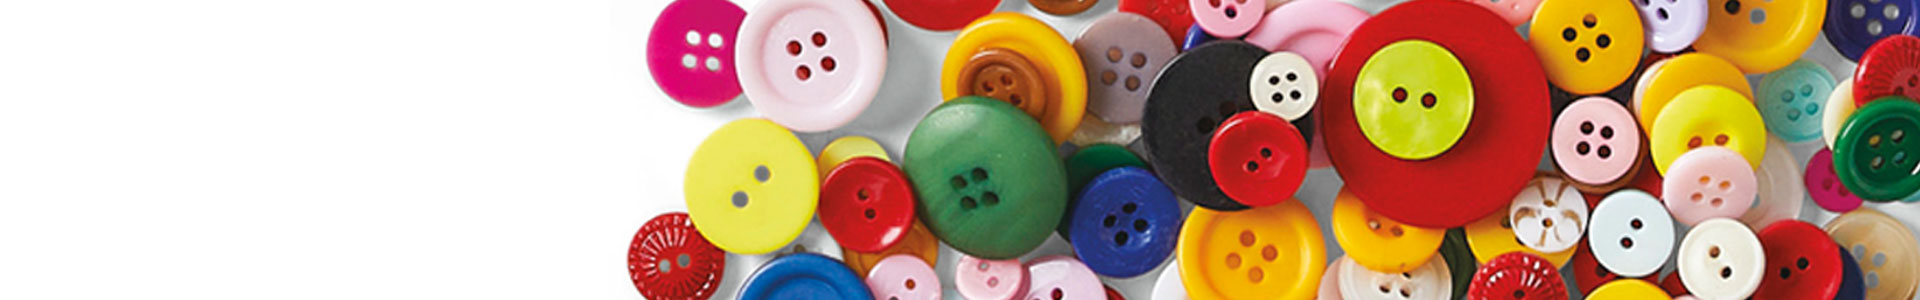 Grab our buttons in packs of various shapes, colors & sizes to prep for large or group craft projects.